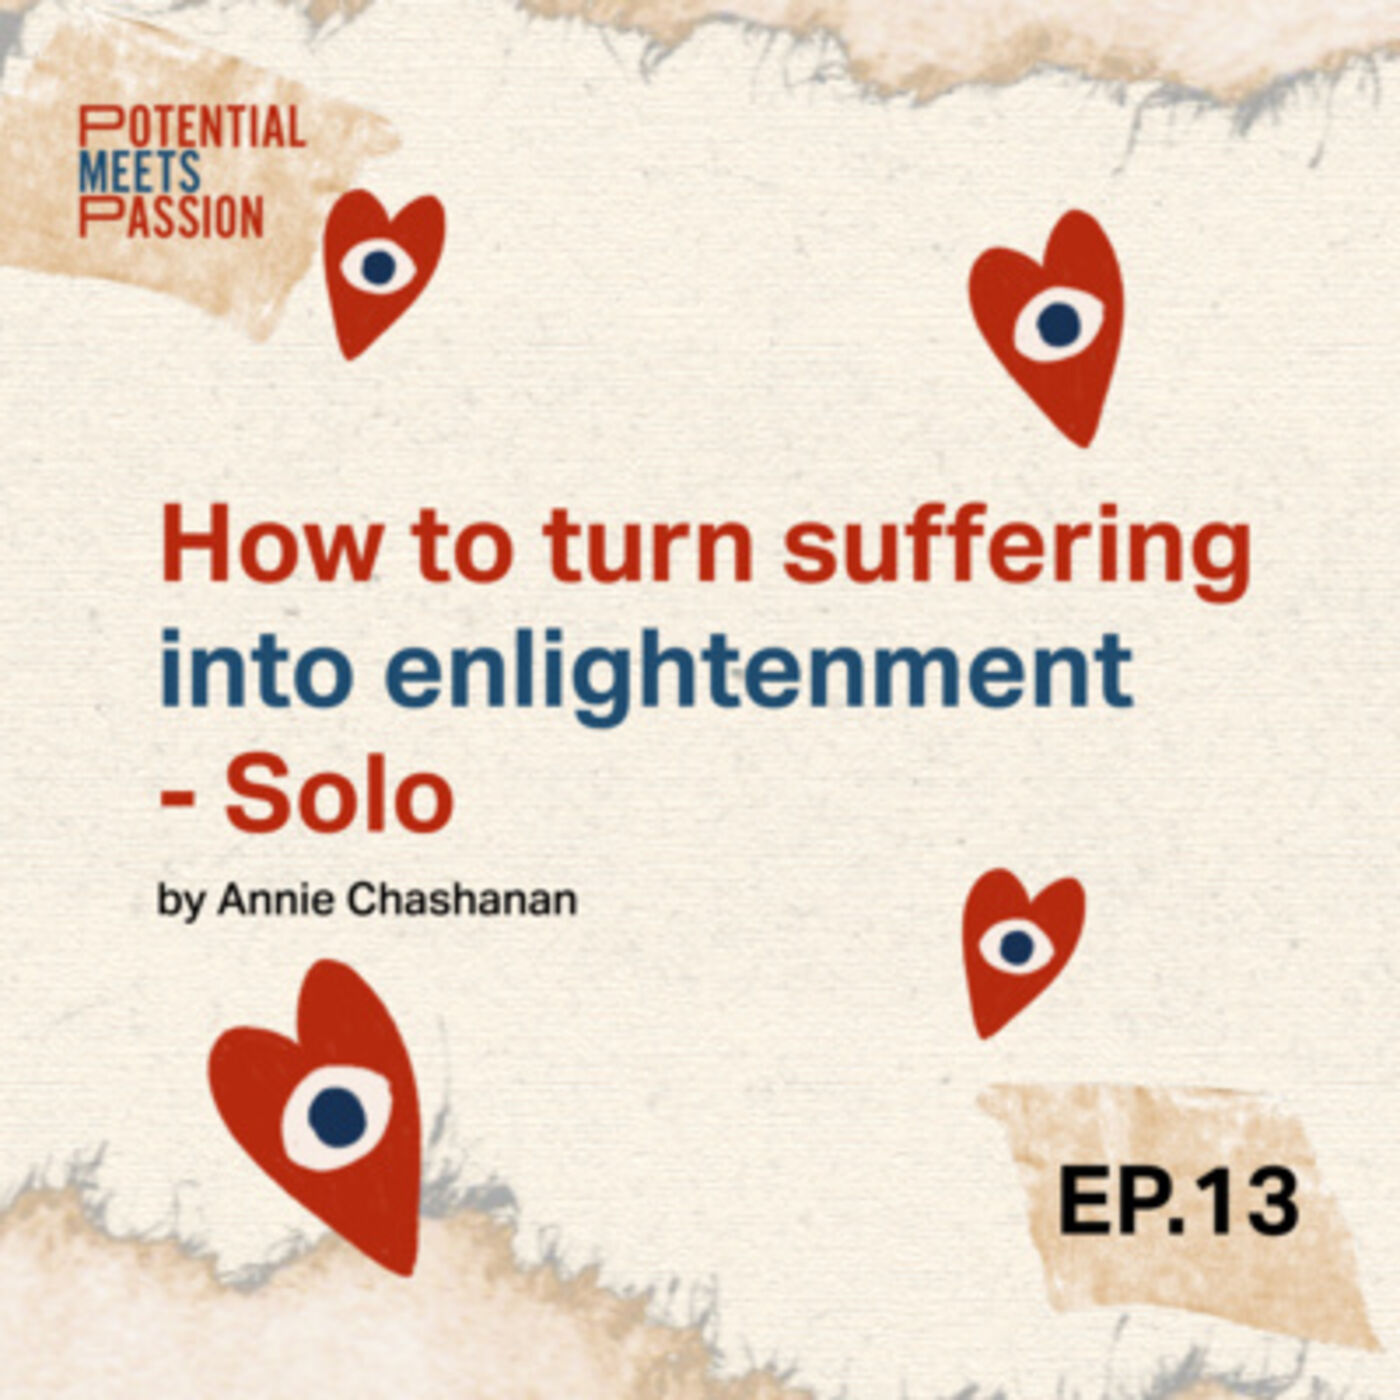 EP. 13 How to turn suffering into enlightenment - Solo